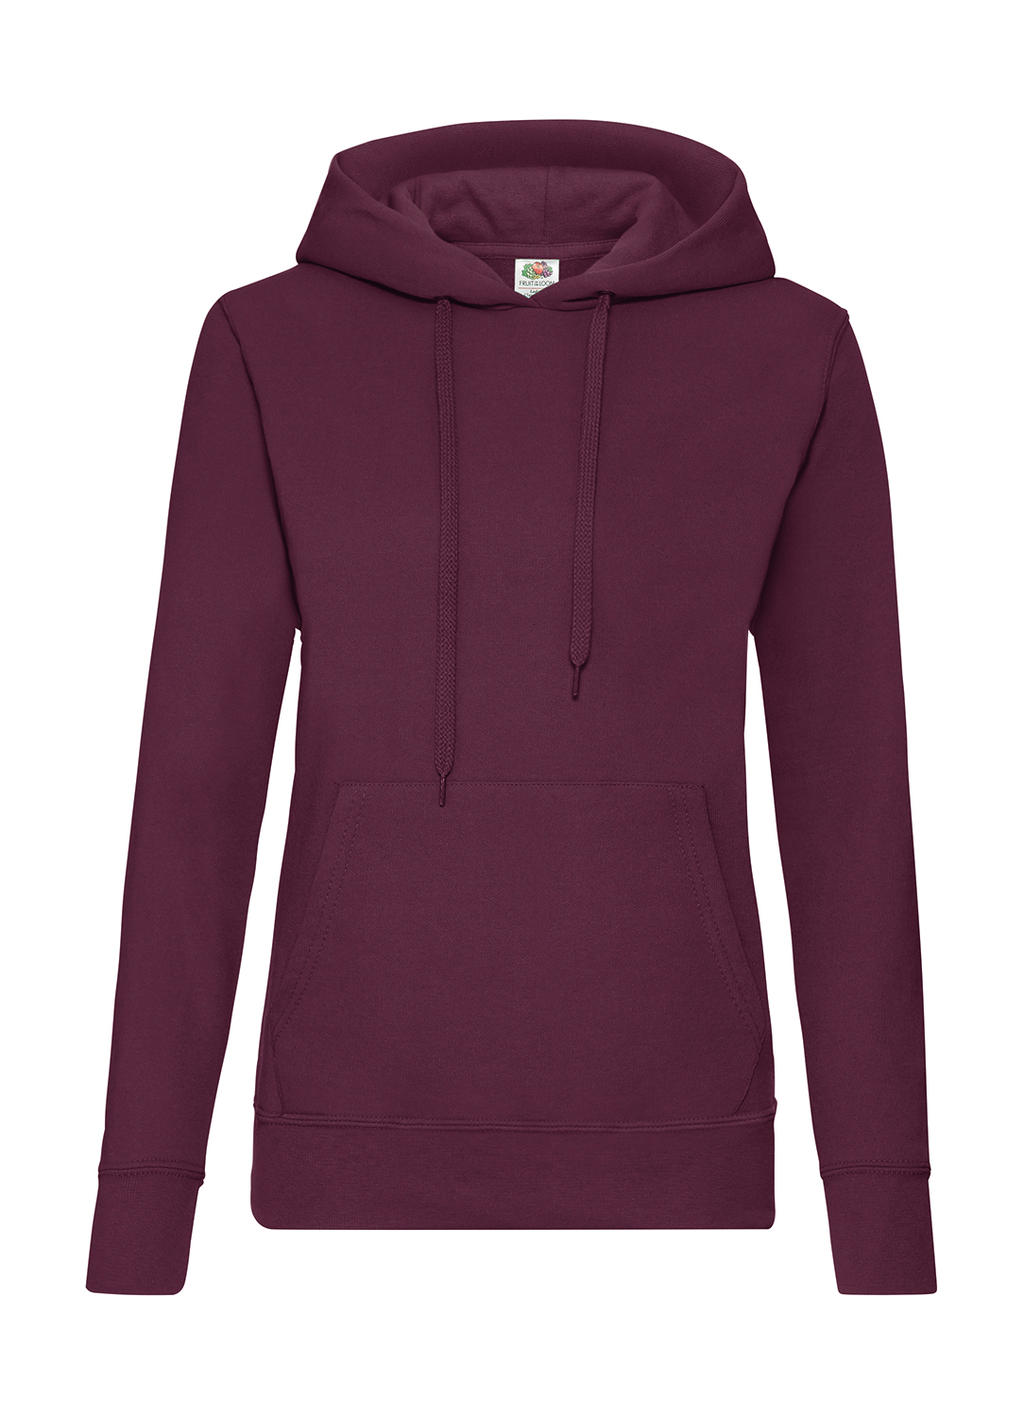  Ladies Classic Hooded Sweat in Farbe Burgundy